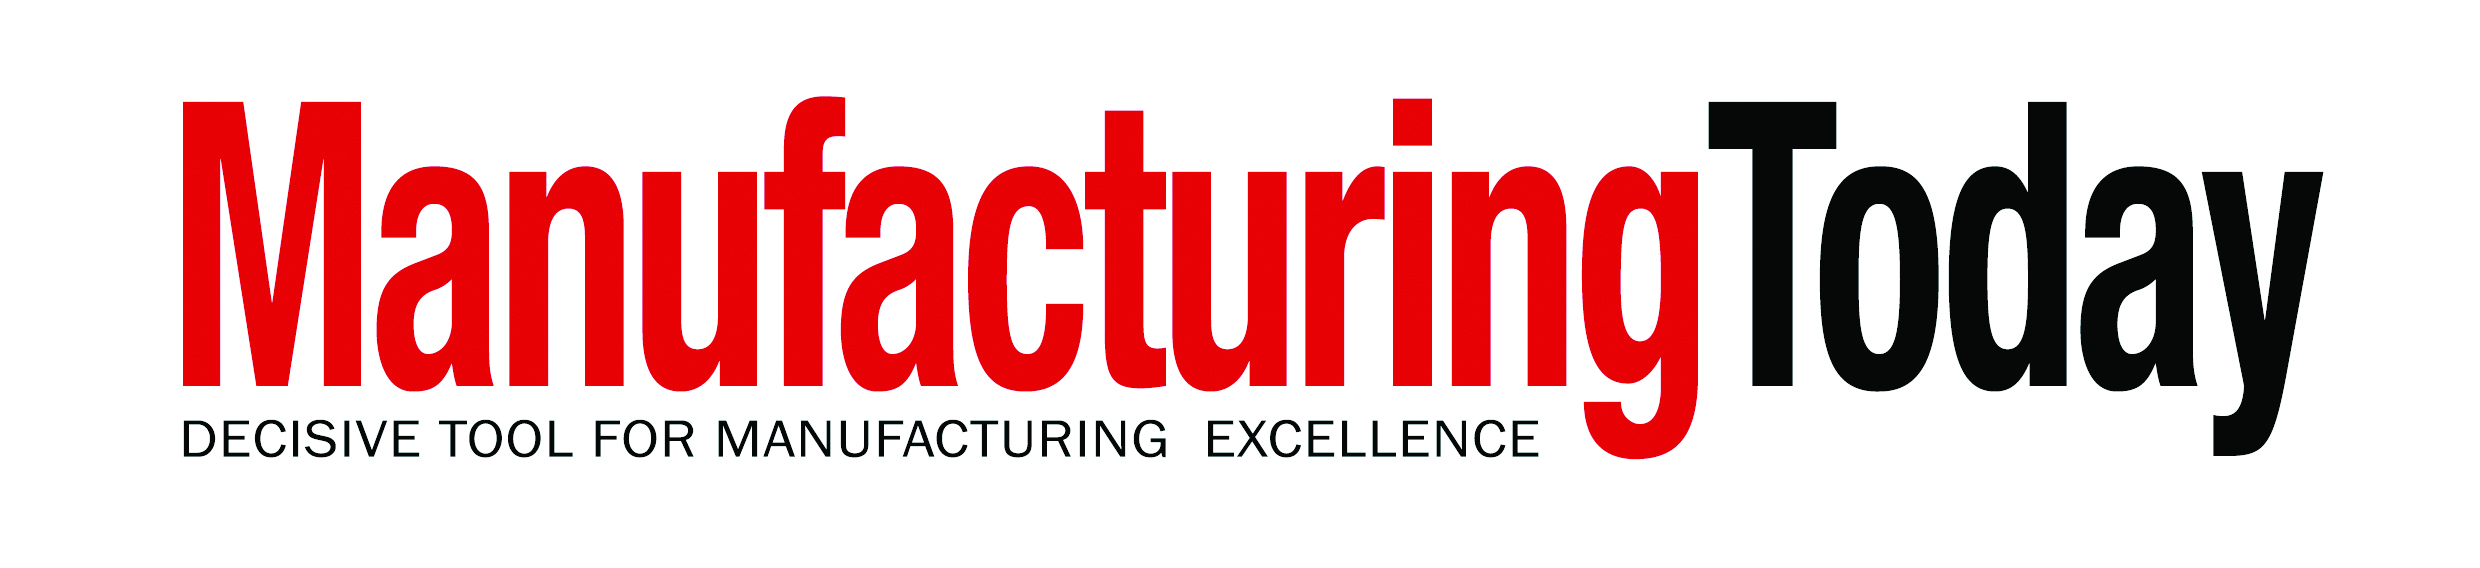 Manufacturing Today New Logo 2015